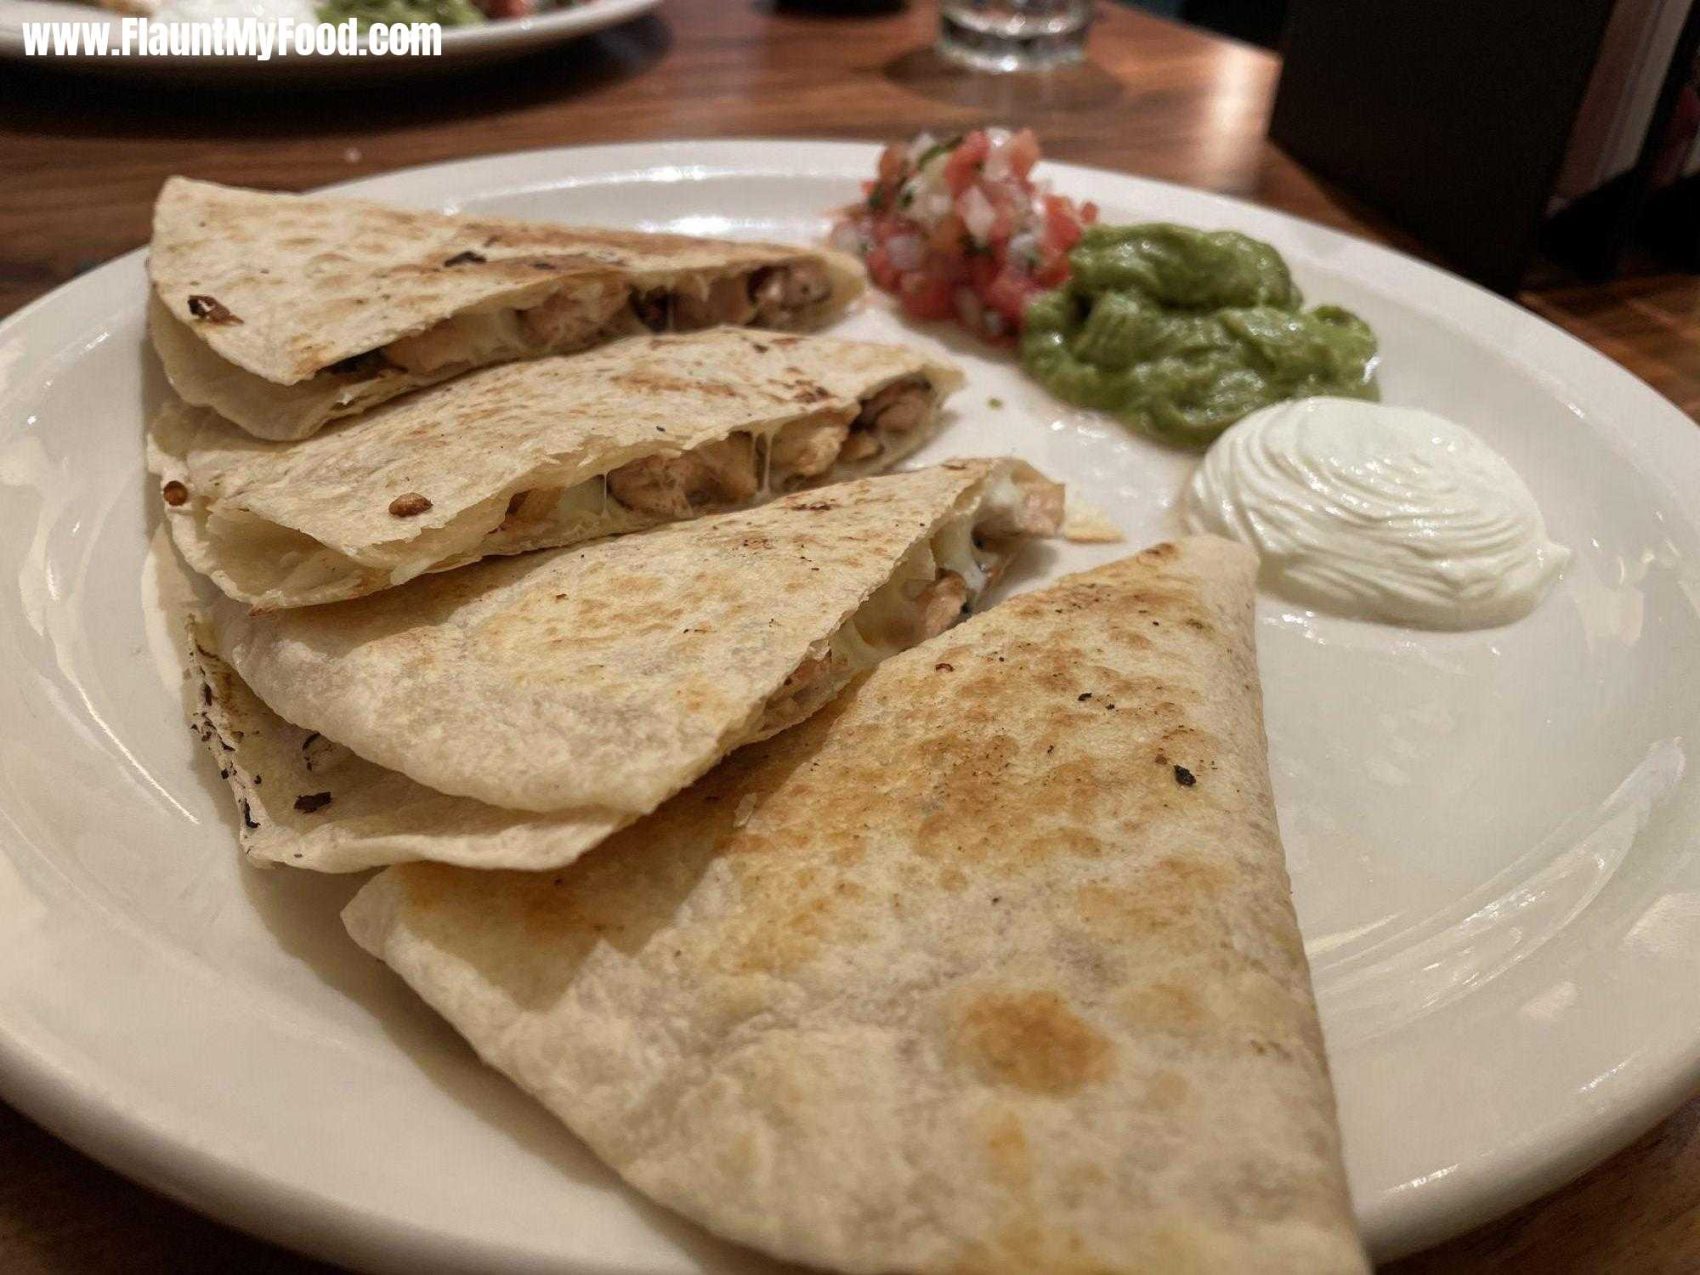 Chicken quesadillas Pacos Mexican Cuisine on Magnolia near downtown Fort Worth Texas 